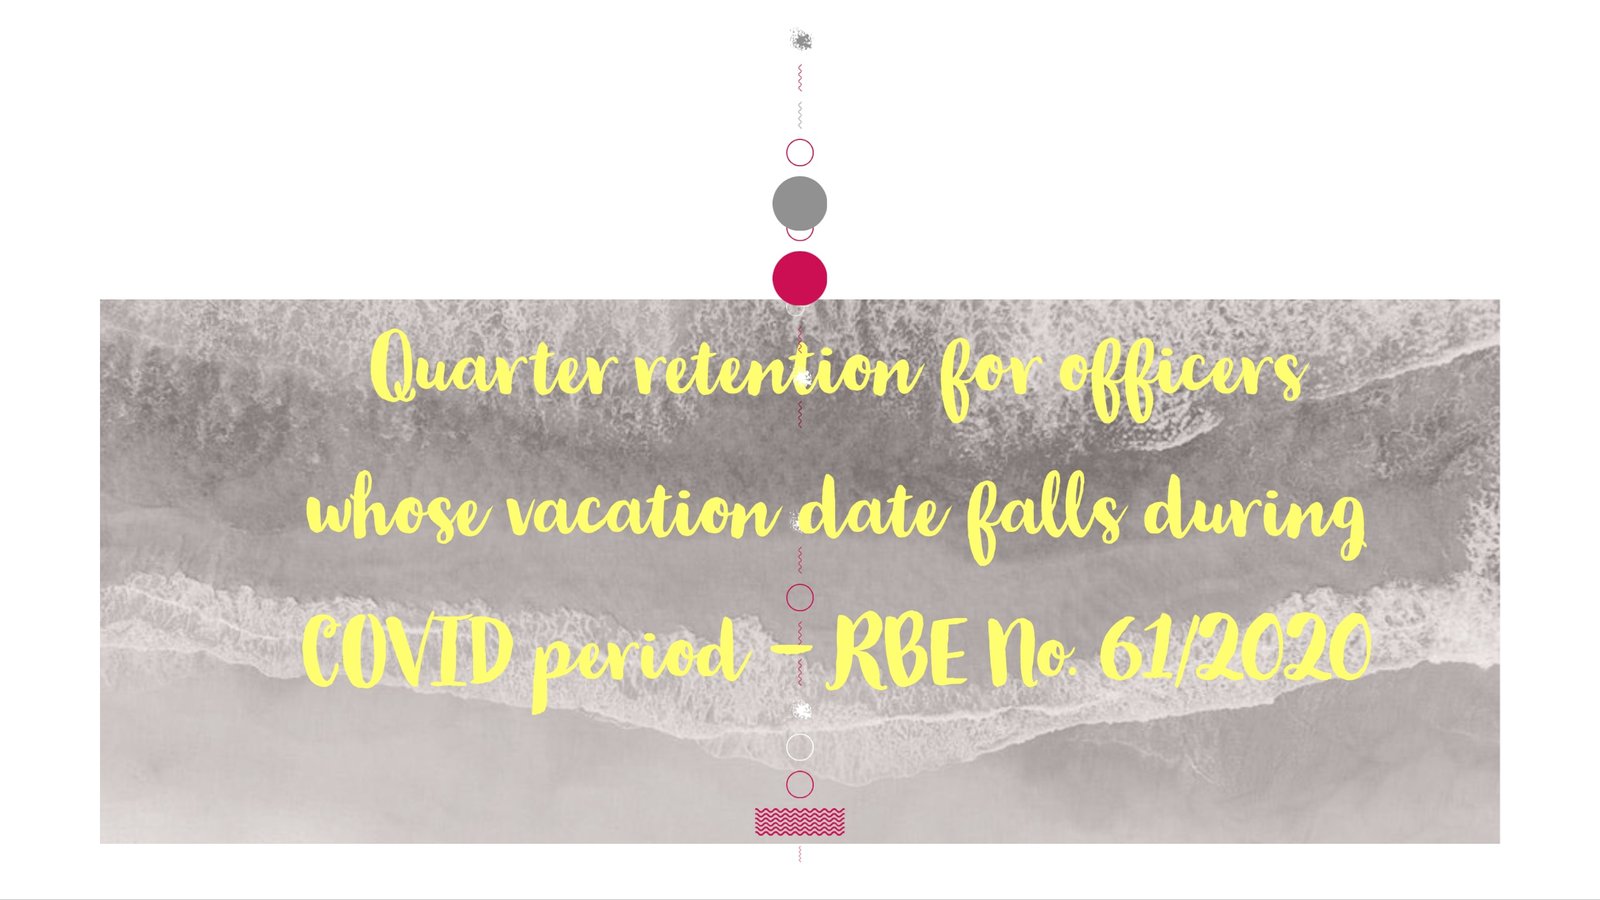 Quarter retention for officers whose vacation date falls during COVID period - RBE No. 61_2020